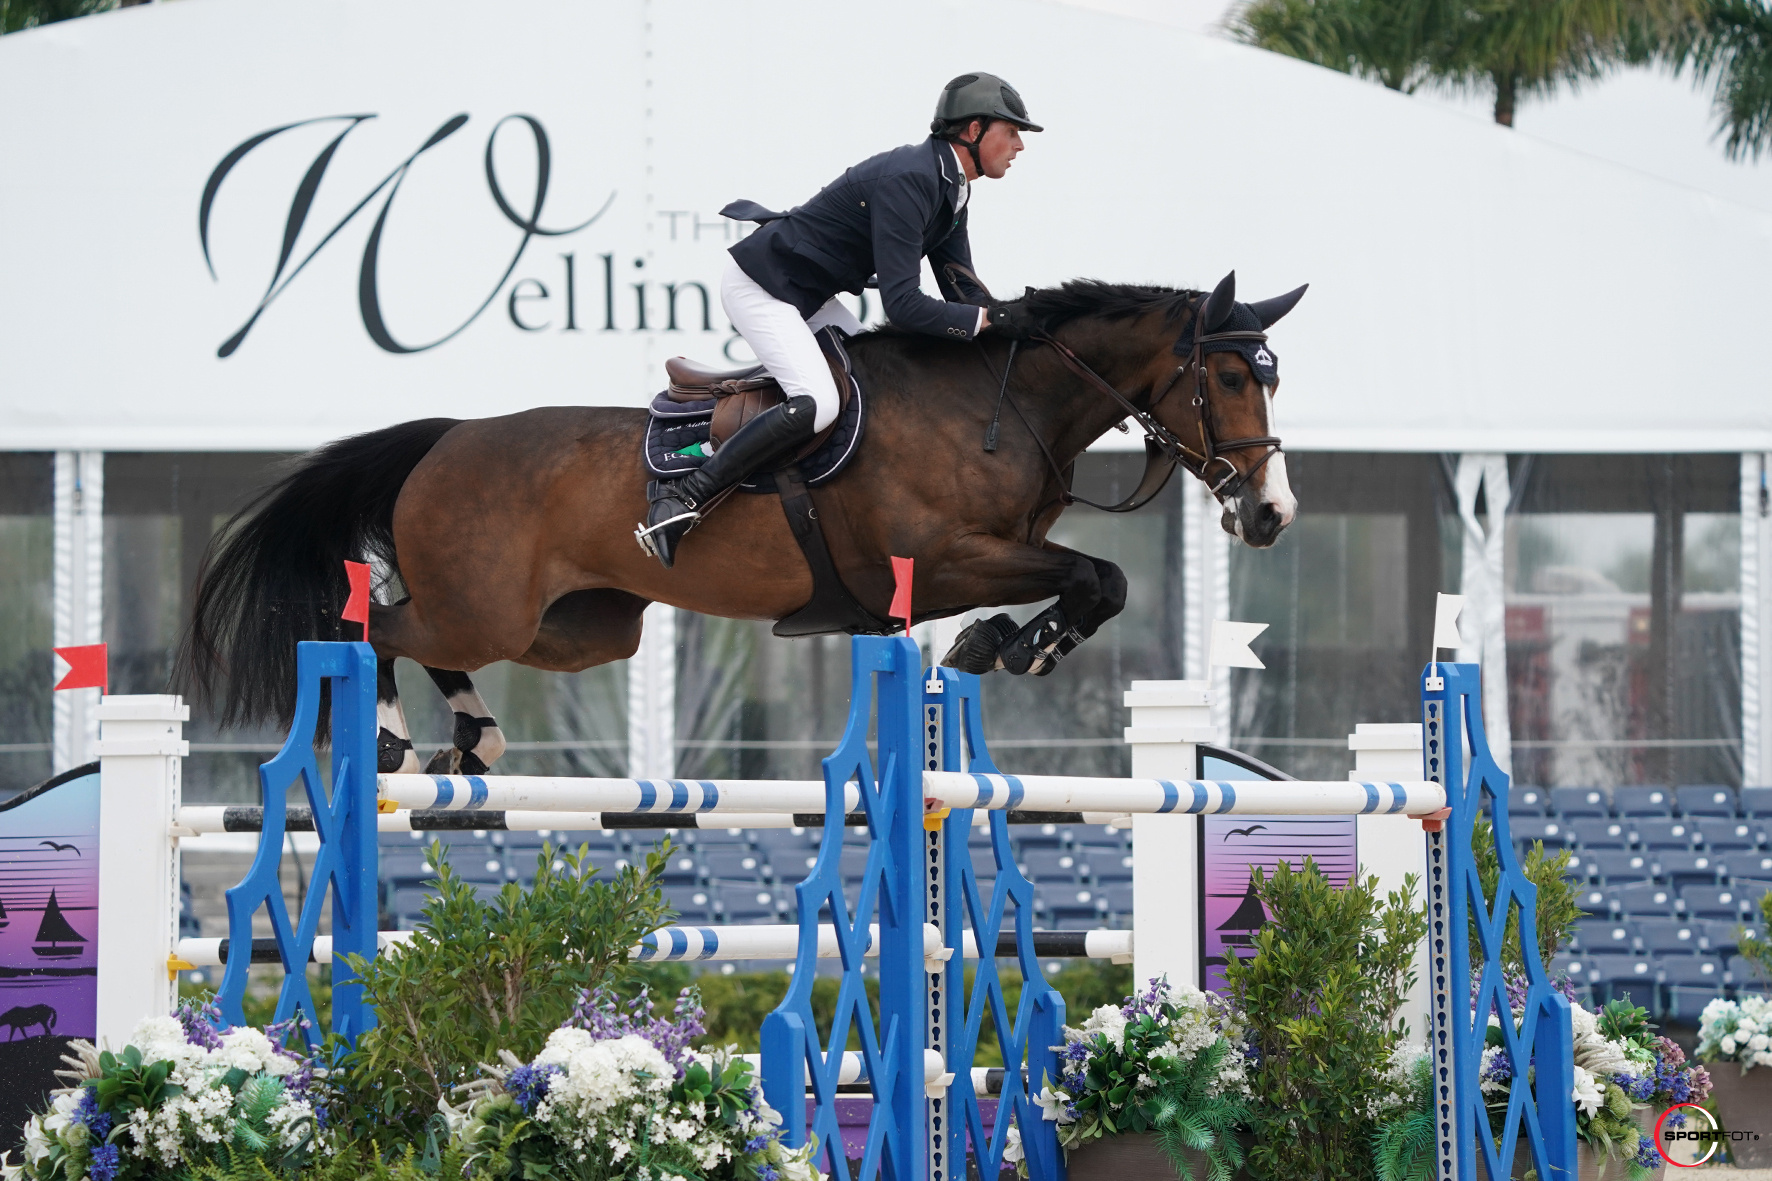 Ben Maher: "My mare is still learning a lot"